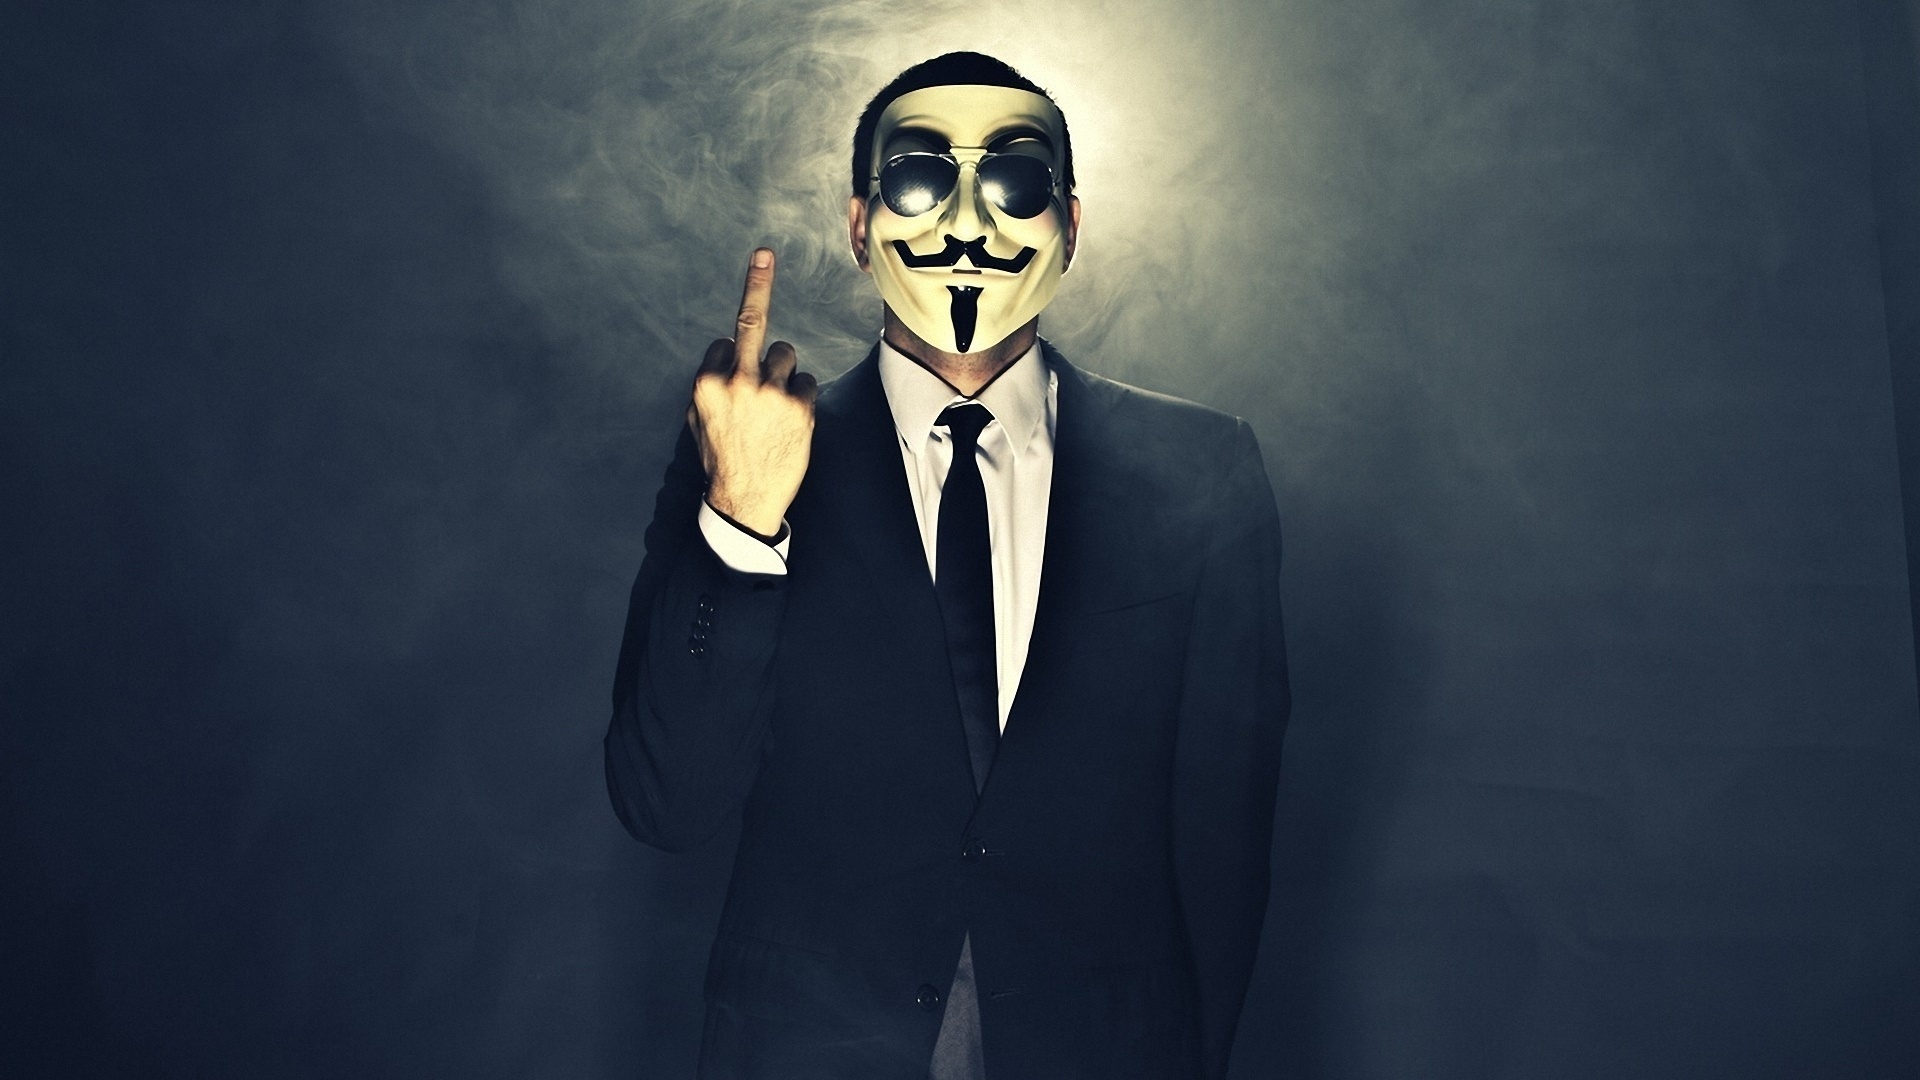 Cool Anonymous Mask Laptop Backgrounds wallpaper | brands and logos |  Wallpaper Better